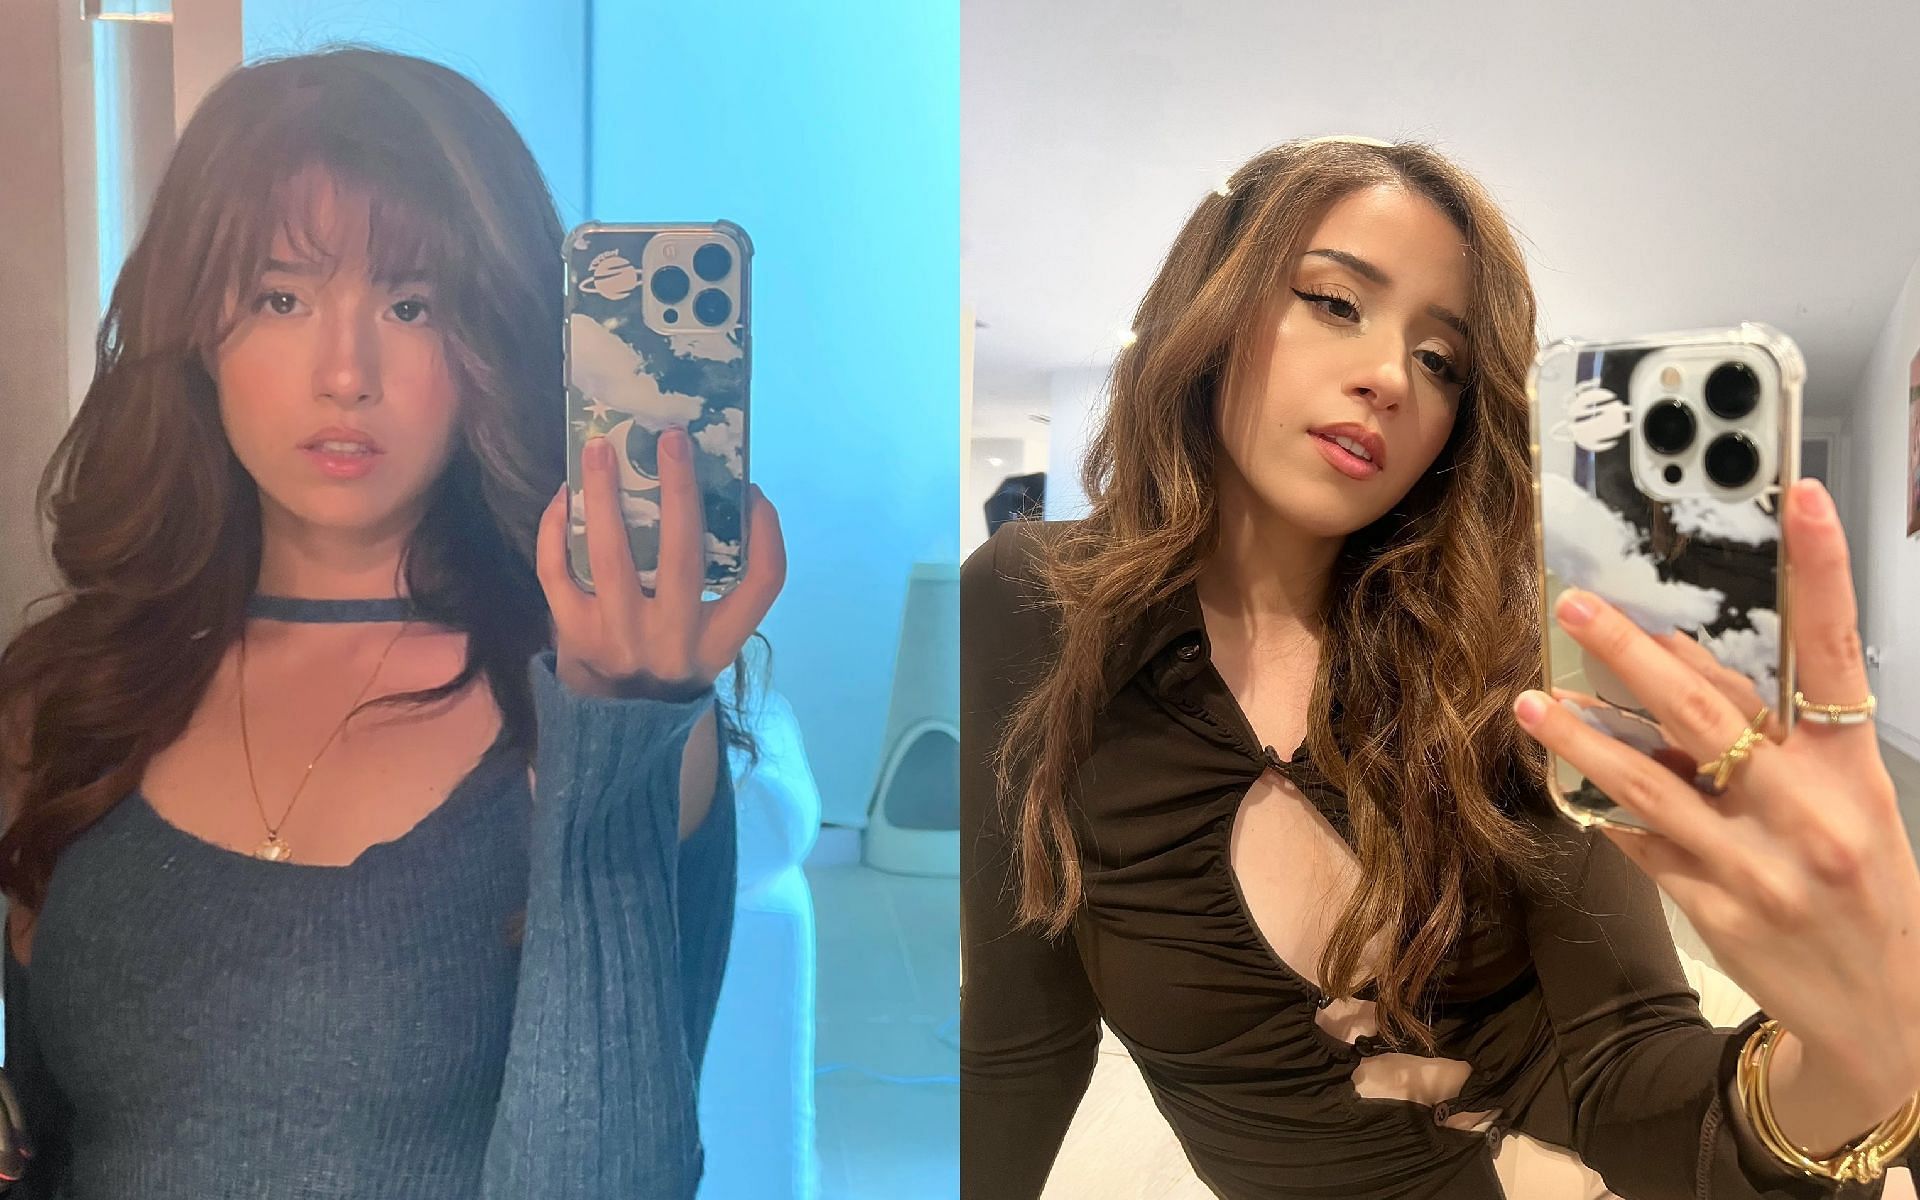 Pokimane reveals a CEO agreeing to pay BitCoin to have a Zoom conversation (Images via Pokimane/Twitter)